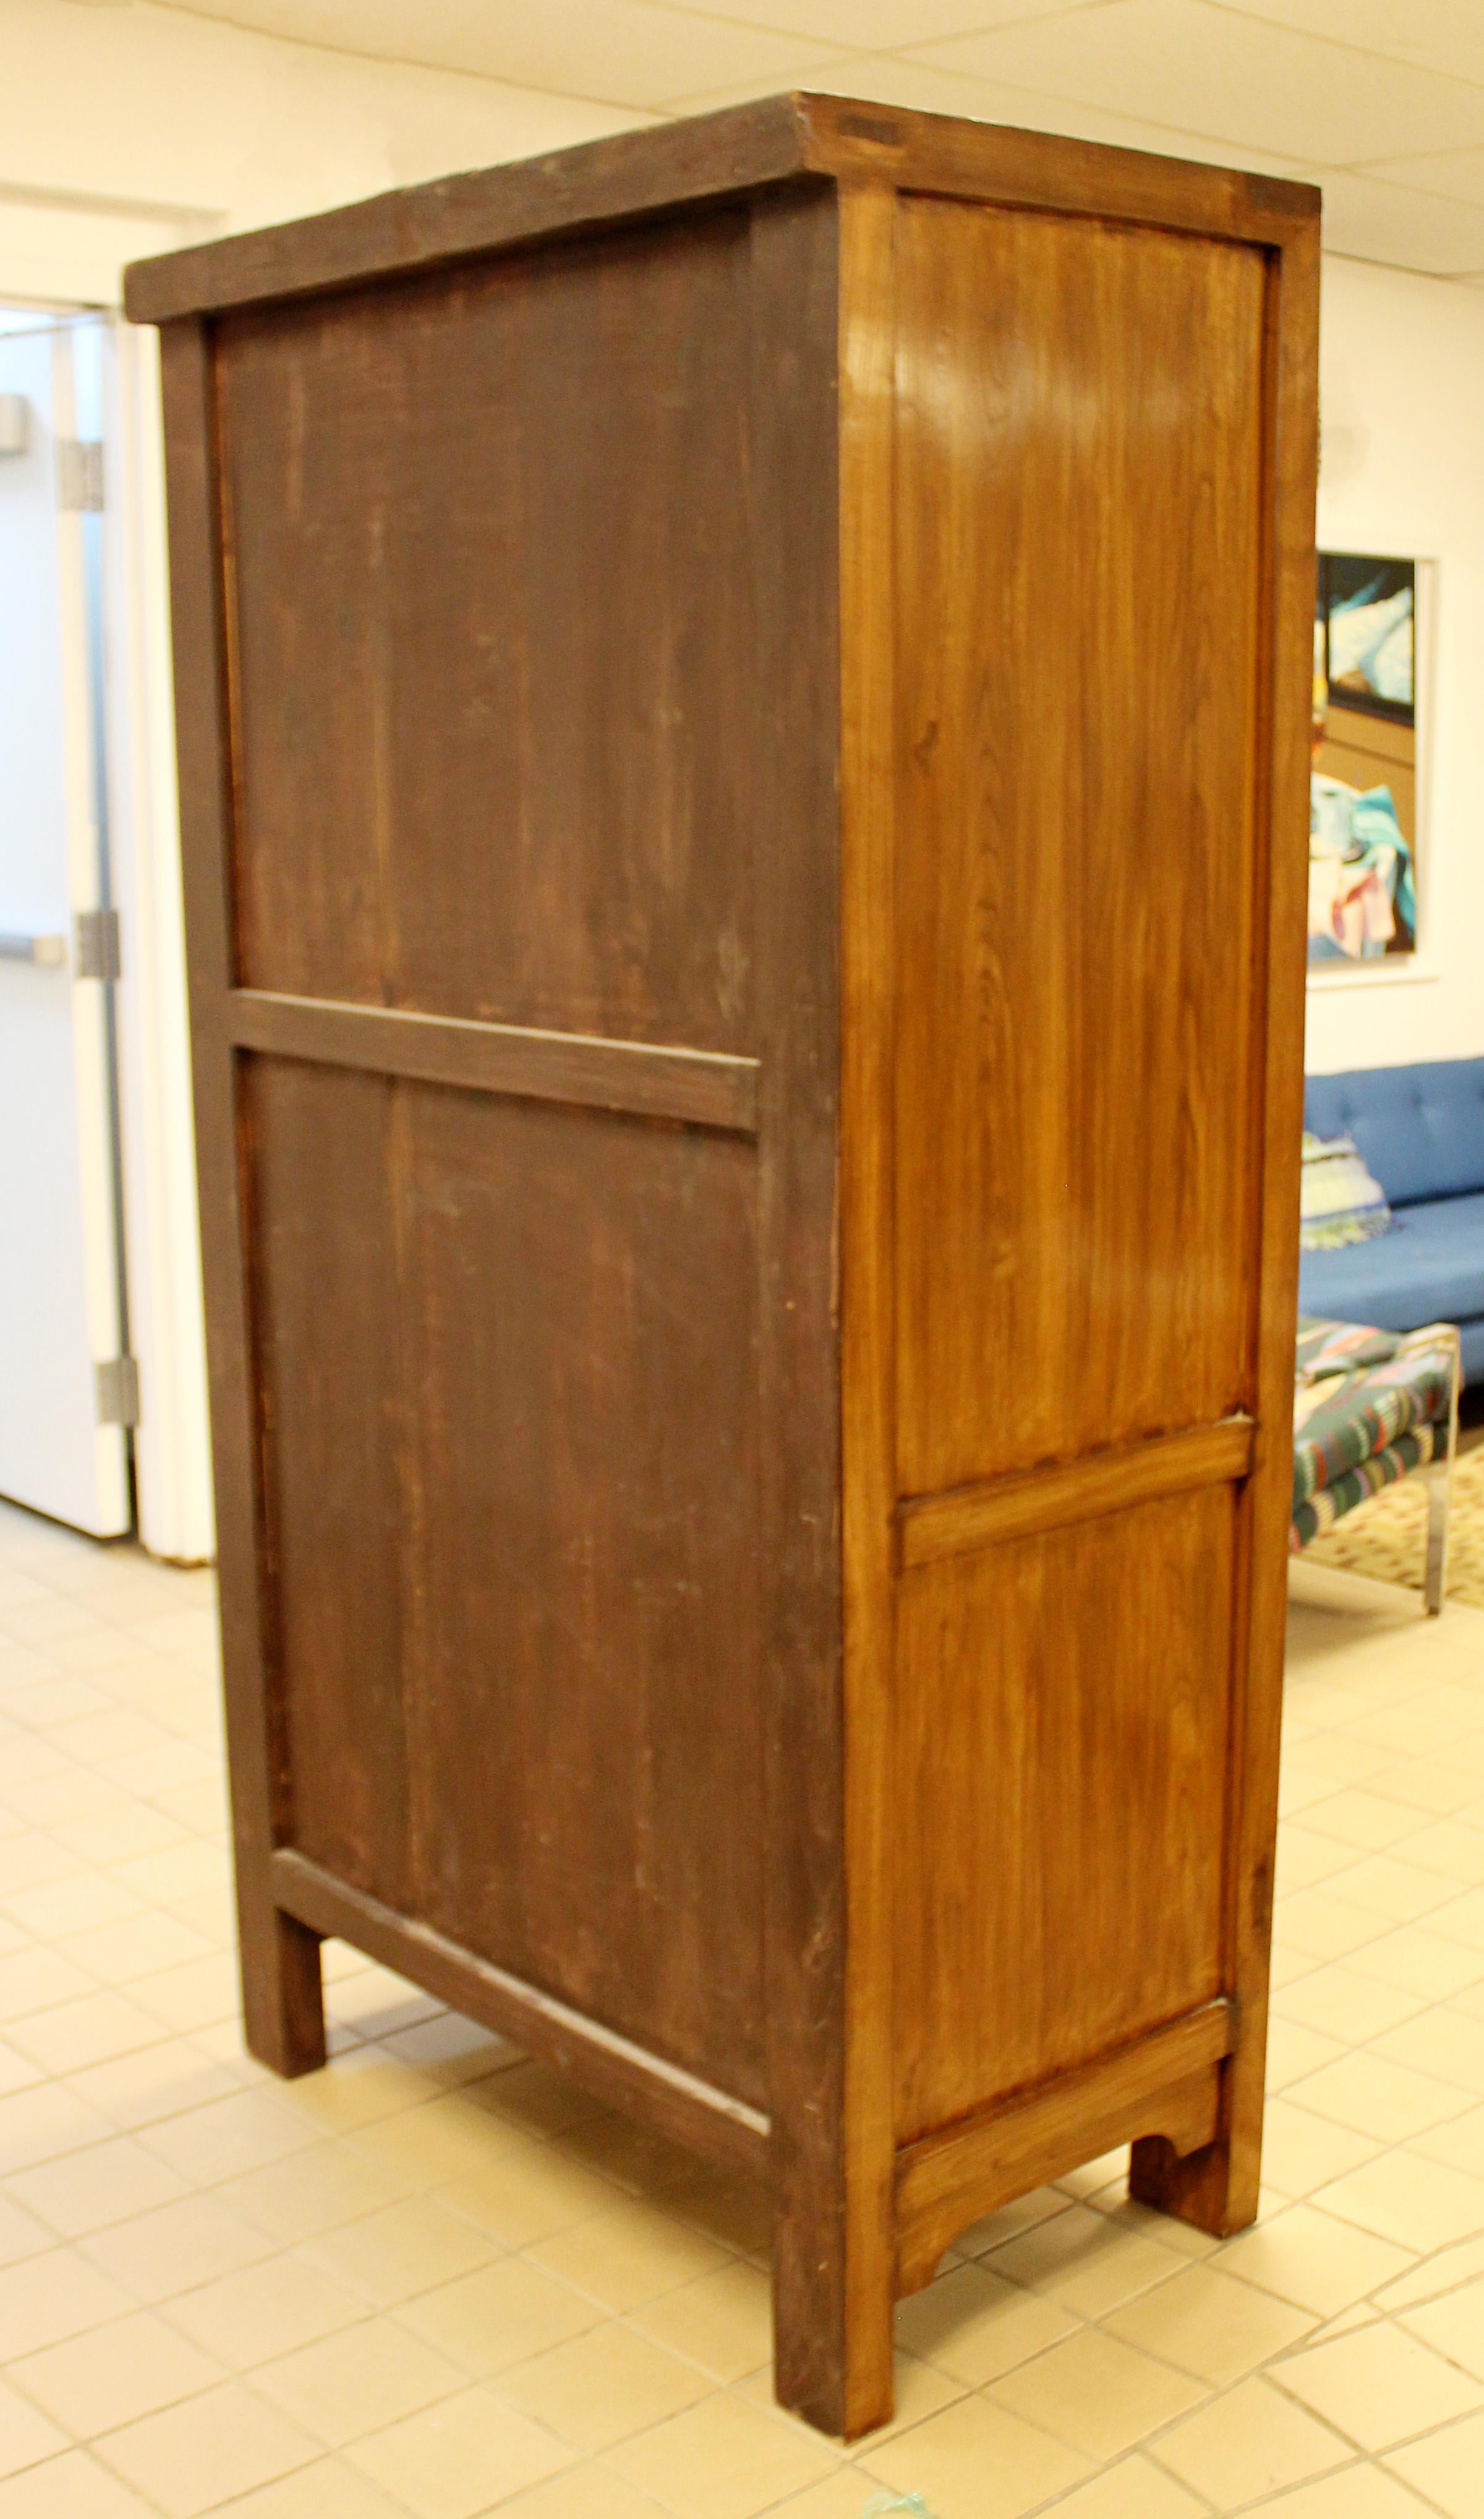 Late 20th Century Asian Cabinet Armoire Wardrobe Dresser Shantong Style 1990s Wood